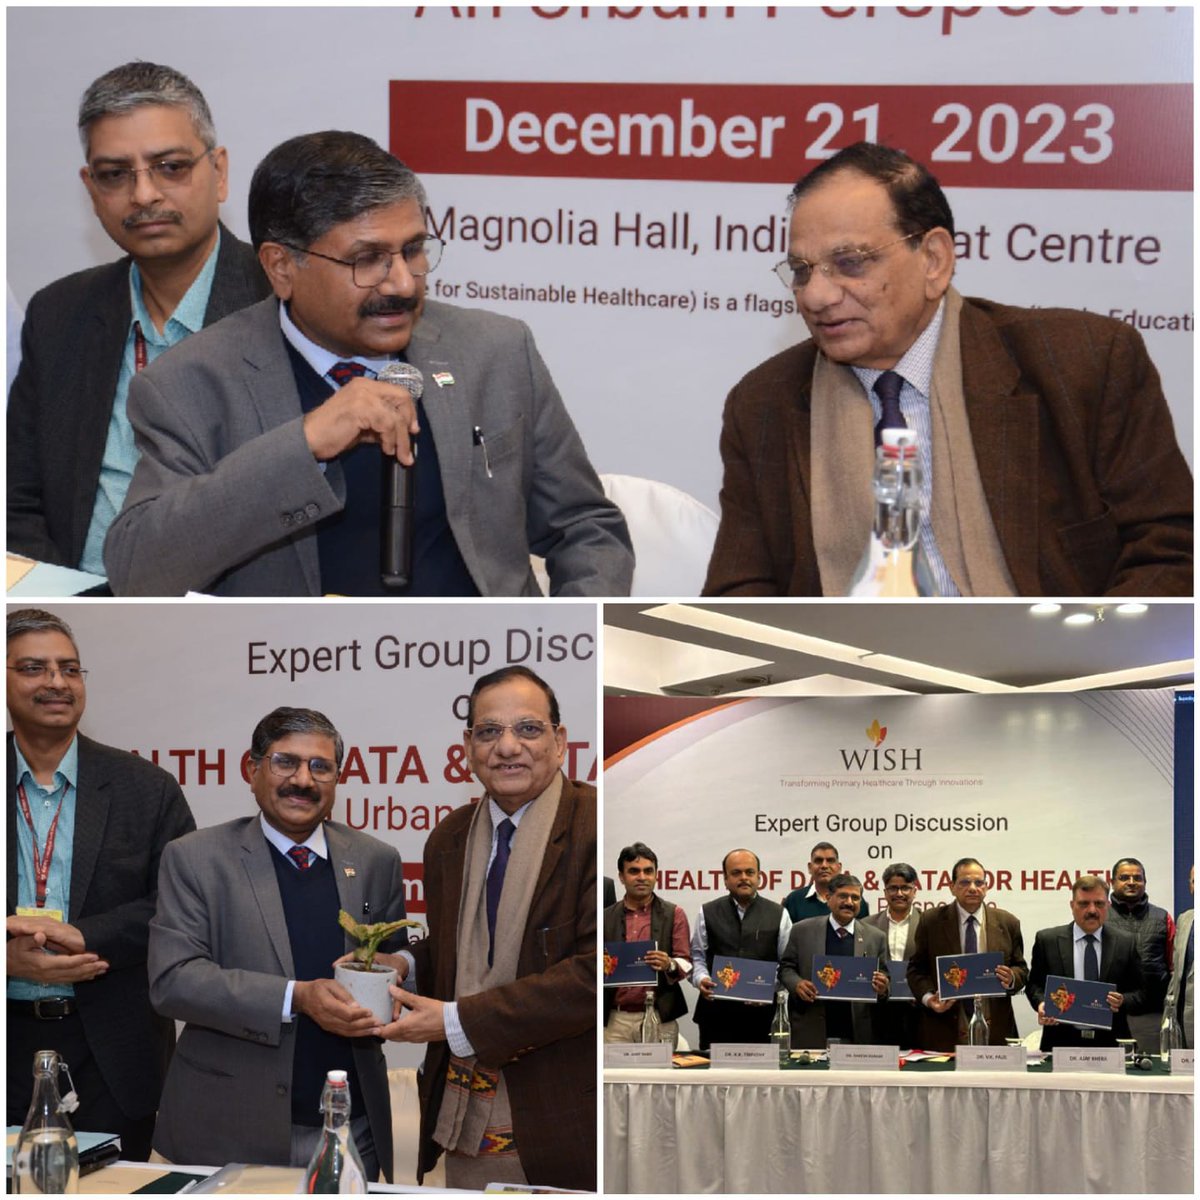 Privileged to have Dr Vinod Paul, Member NITI Aayog, Dr KK Tripathy, JS (NUHM), and stalwarts, at the Launch of WISH Factsheets: 'Urban Health through Data Lens' and a discourse on Urban Health. @PMOIndia @MoHFW_INDIA @NITIAayog @UNICEFIndia @usaid_india @BMGFIndia @WHOSEARO